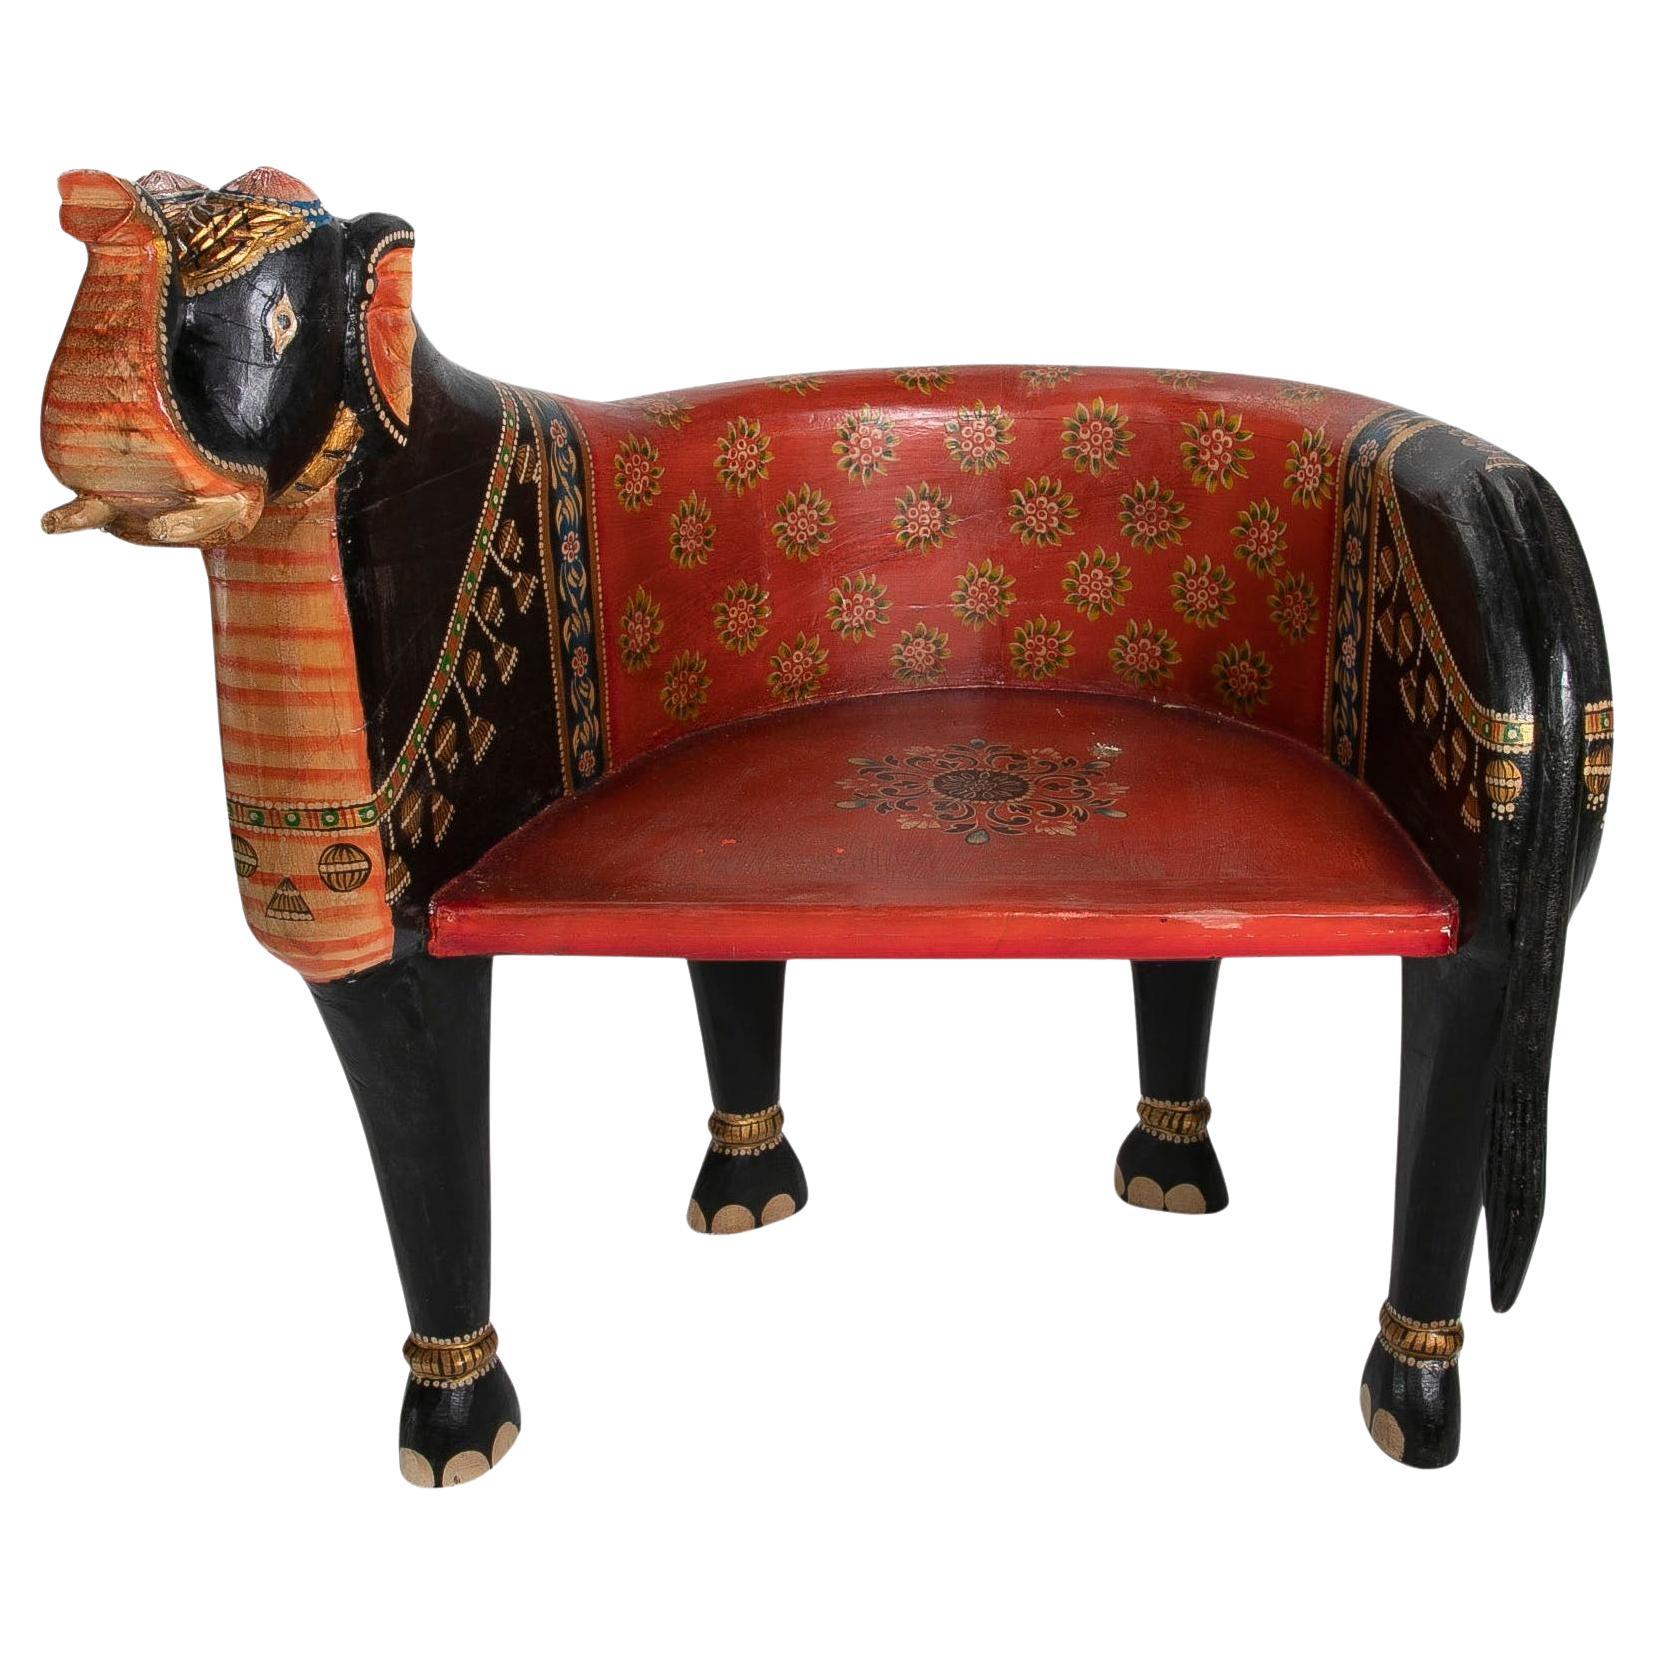 Hand-Carved and Hand-Painted Wooden Elephant Armchair For Sale